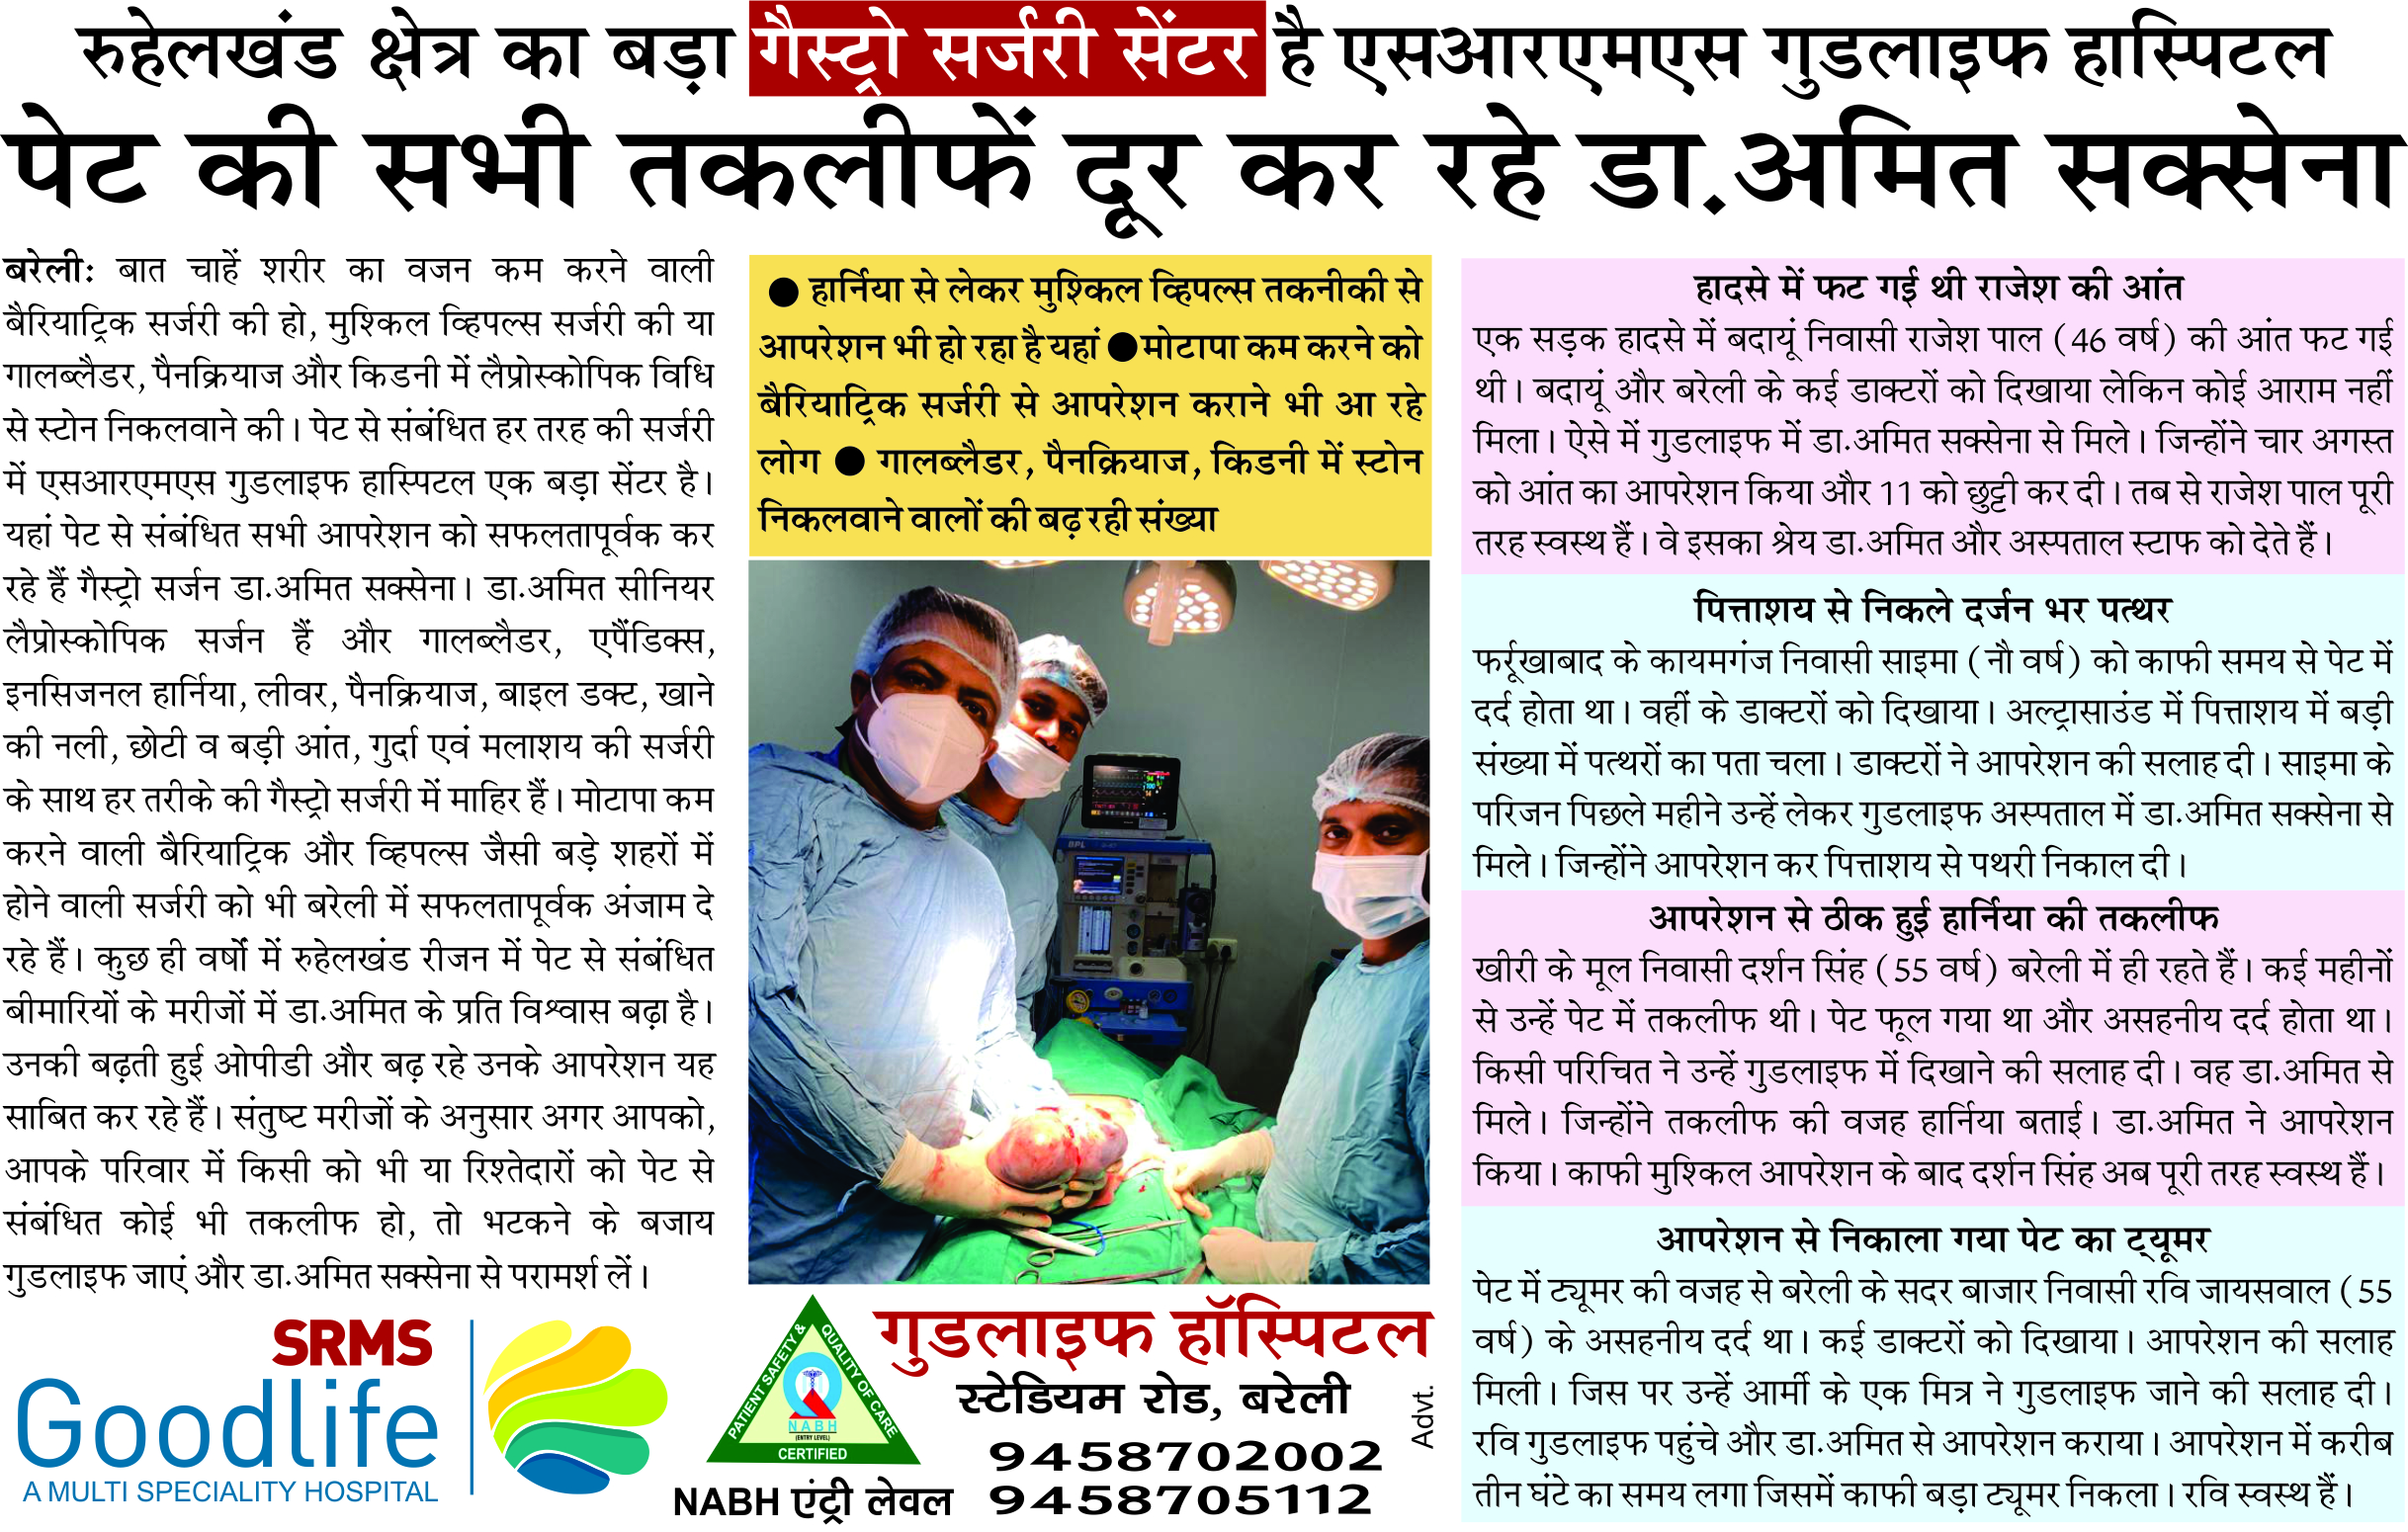 Dr. Amit Saxena is Treating all Stomach Problems at SRMS Goodlife